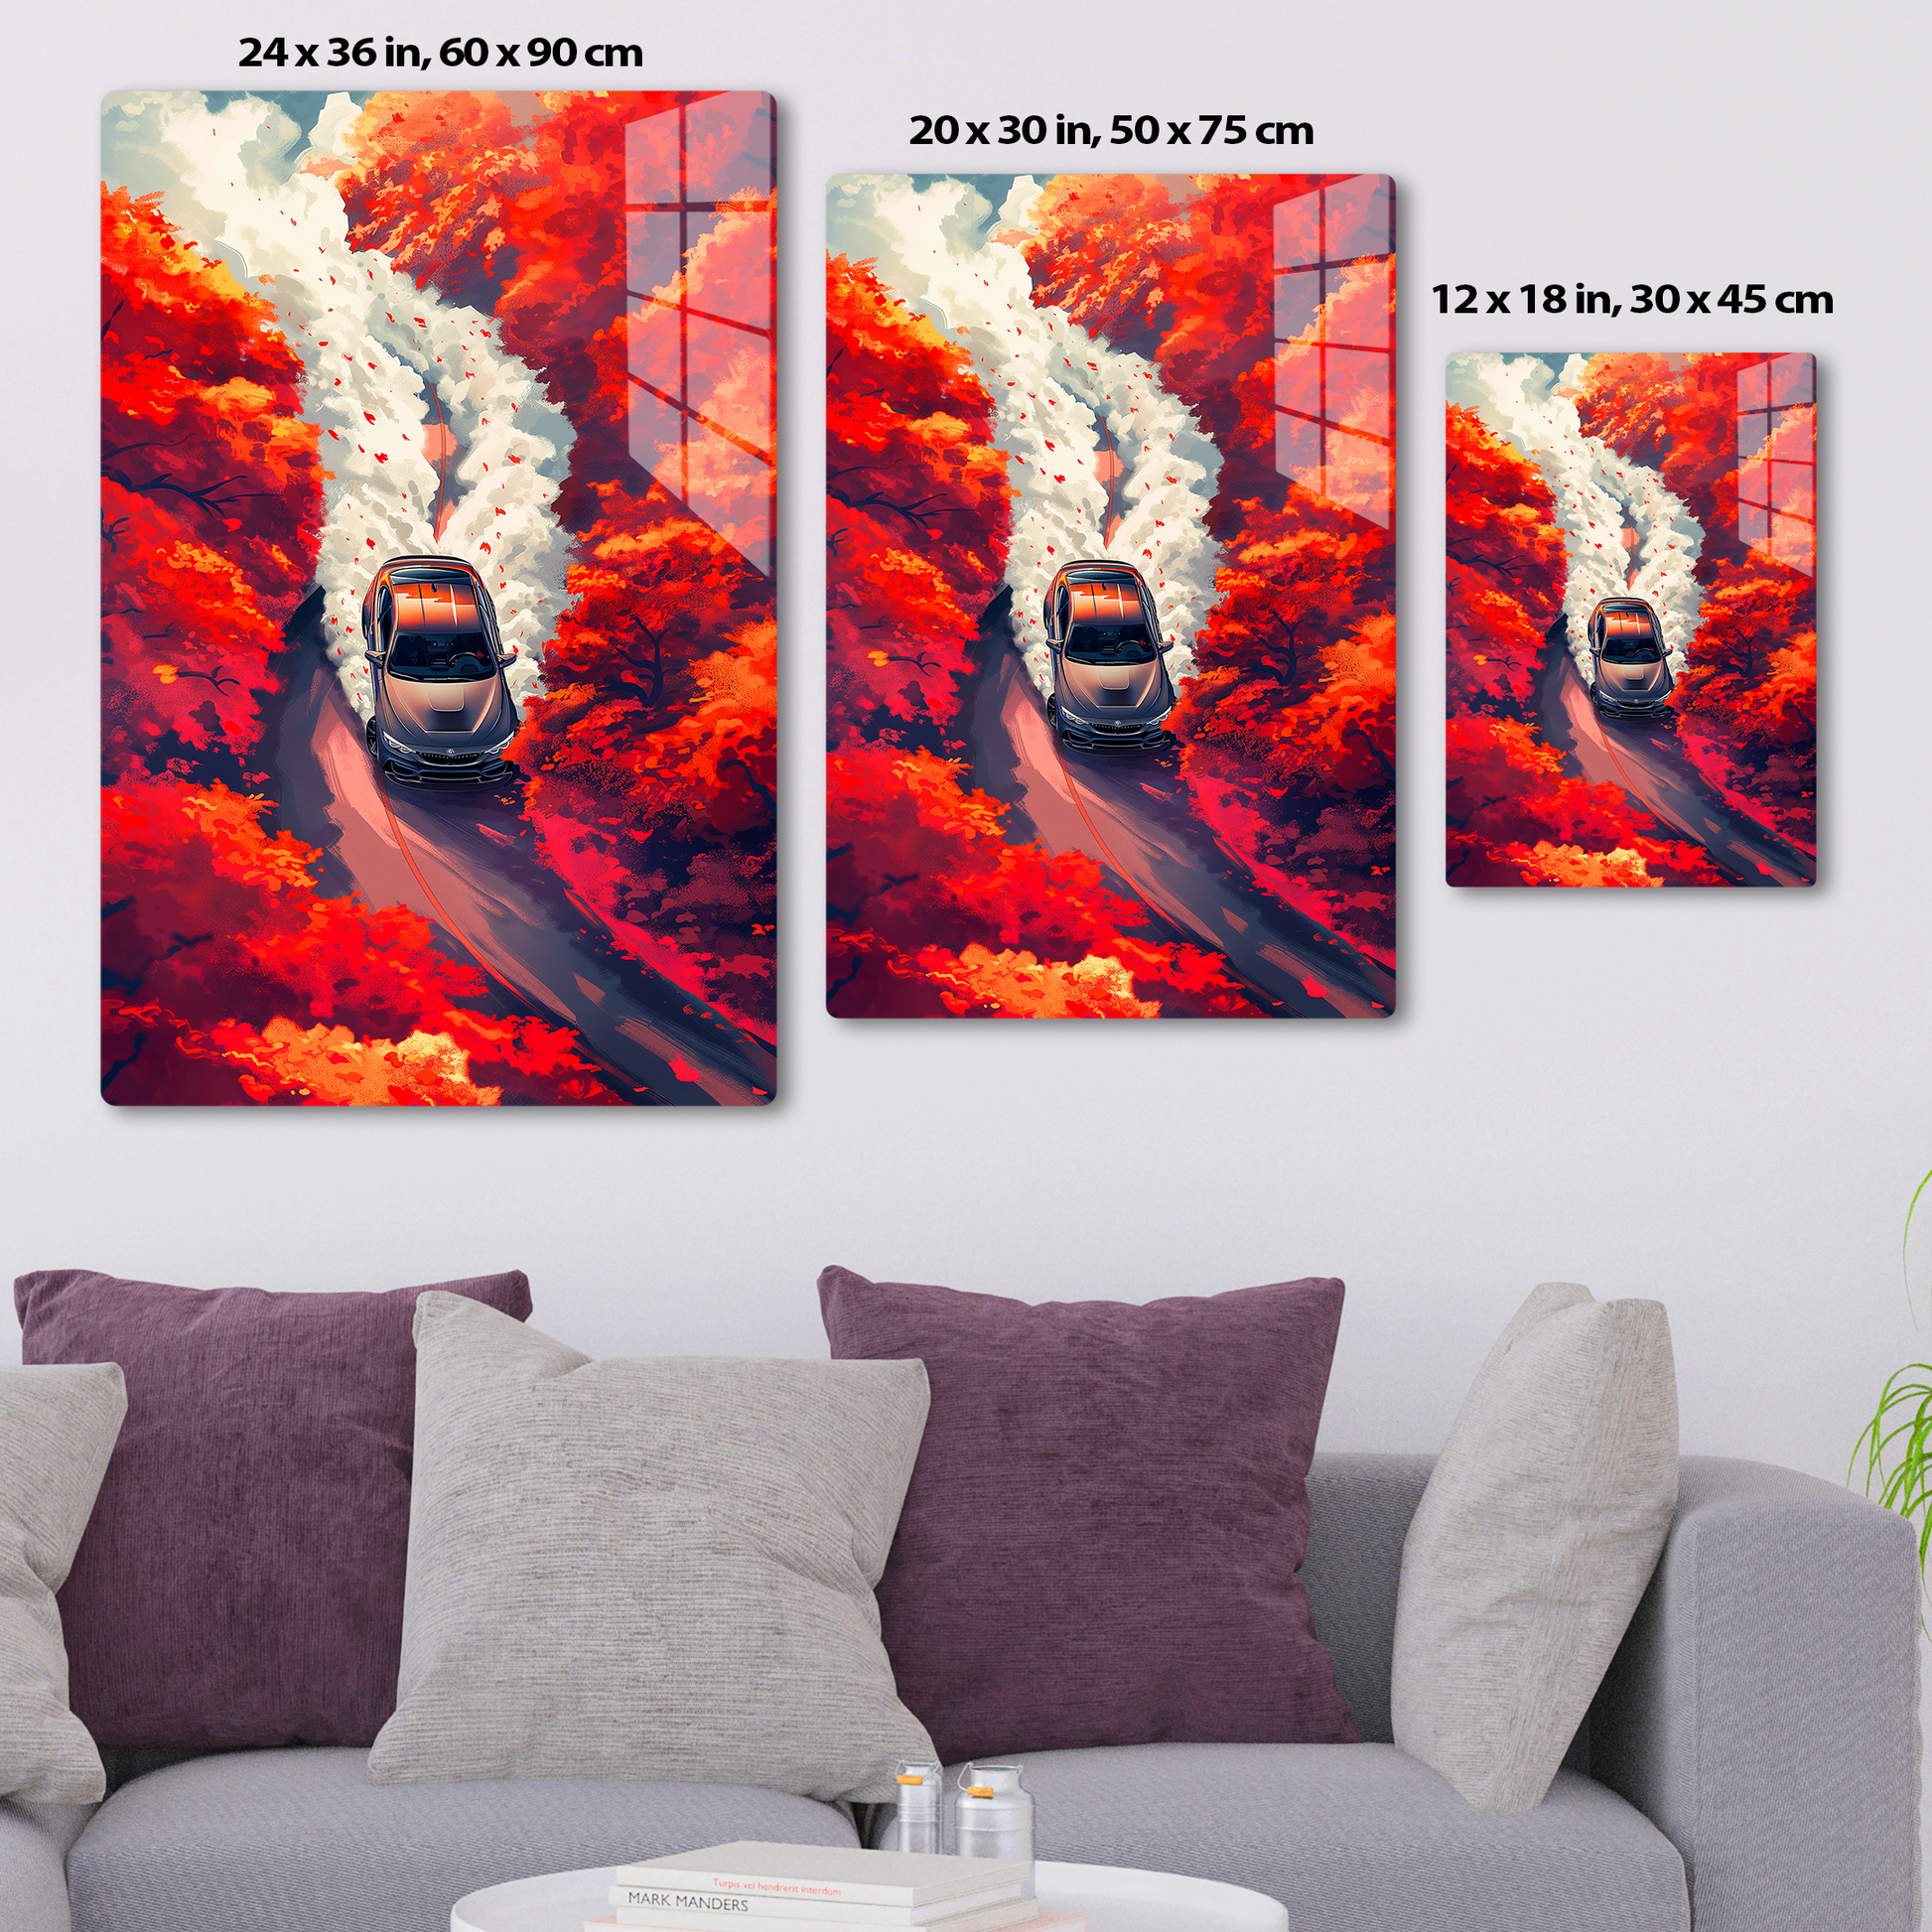 Autumn Drive (Acrylic)Step into the universe with an A drift car journey through a fiery autumnal forest. Acrylic art from RimaGallery. Experience the cosmos in your home with vibrant, etRimaGallery